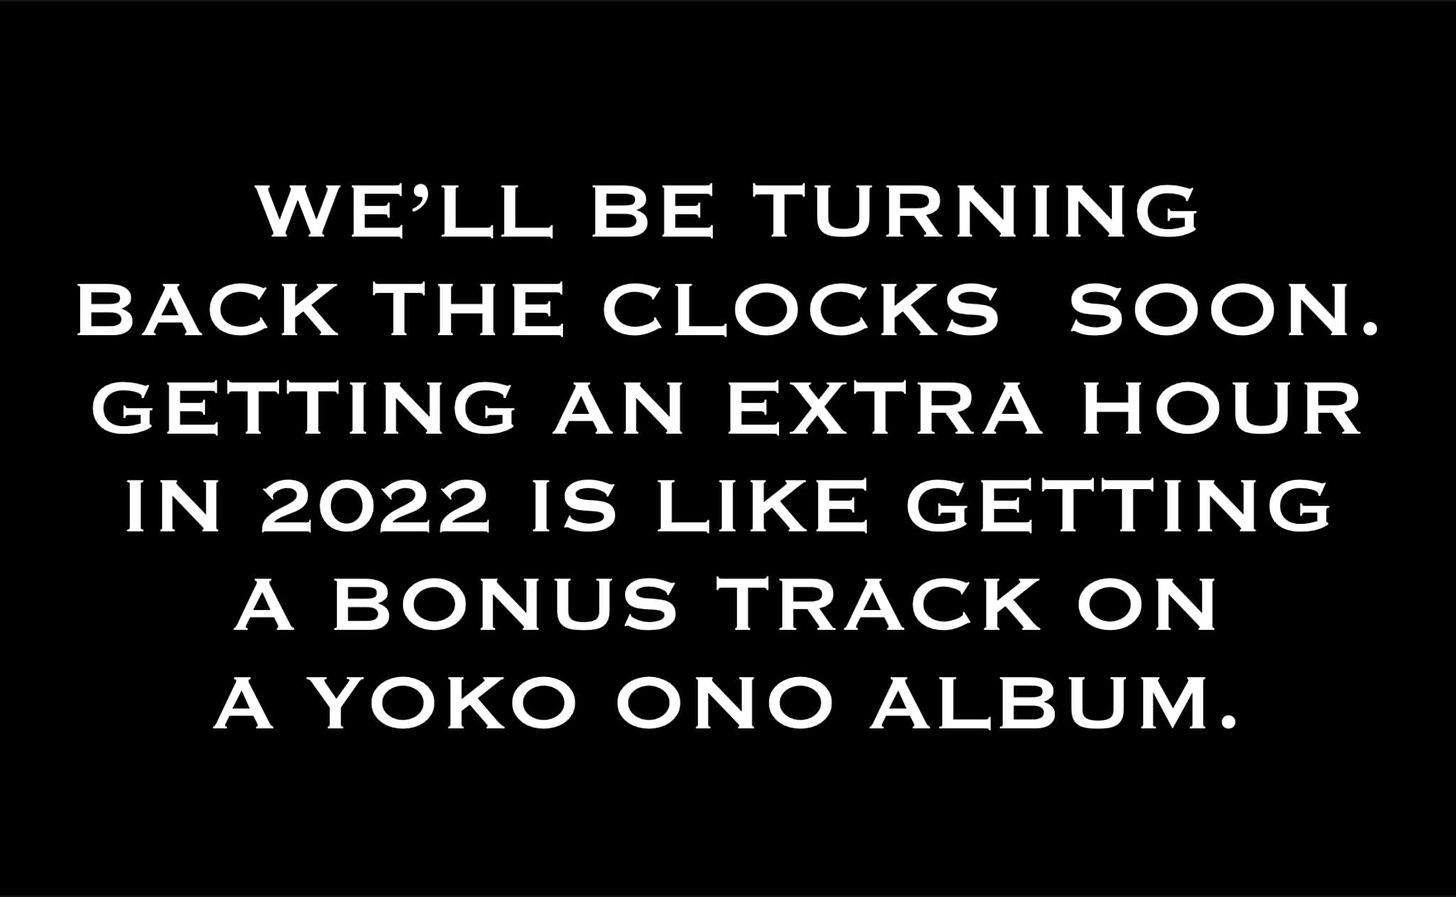 May be an image of text that says 'WE'LL BE TURNING BACK THE CLOCKS SOON. GETTING AN EXTRA HOUR IN 2022 IS LIKE GETTING A BONUS TRACK ON A YOKO ONO ALBUM.'